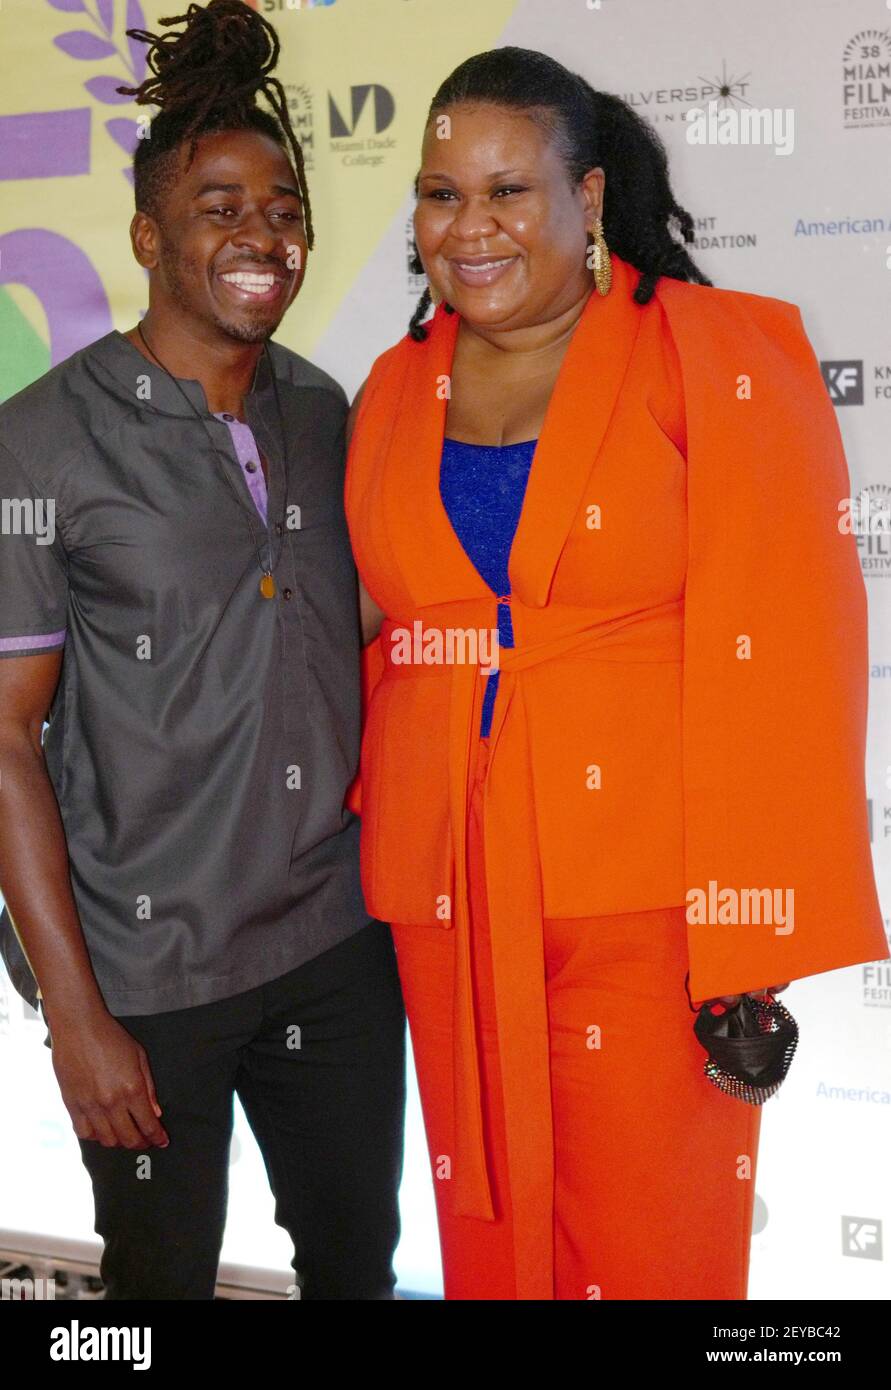 Miami, United States. 05th Mar, 2021. (L-R) Director Edson Jean and Kerline Alce walk the red carpet at the Miami Dade College's 38th Annual Miami Film Festival Opening Night and World Premiere of LUDI at the Silverspot Cinema in Miami, Florida, Friday, March 5, 2021. Photo by Gary I Rothstein/UPI Credit: UPI/Alamy Live News Stock Photo